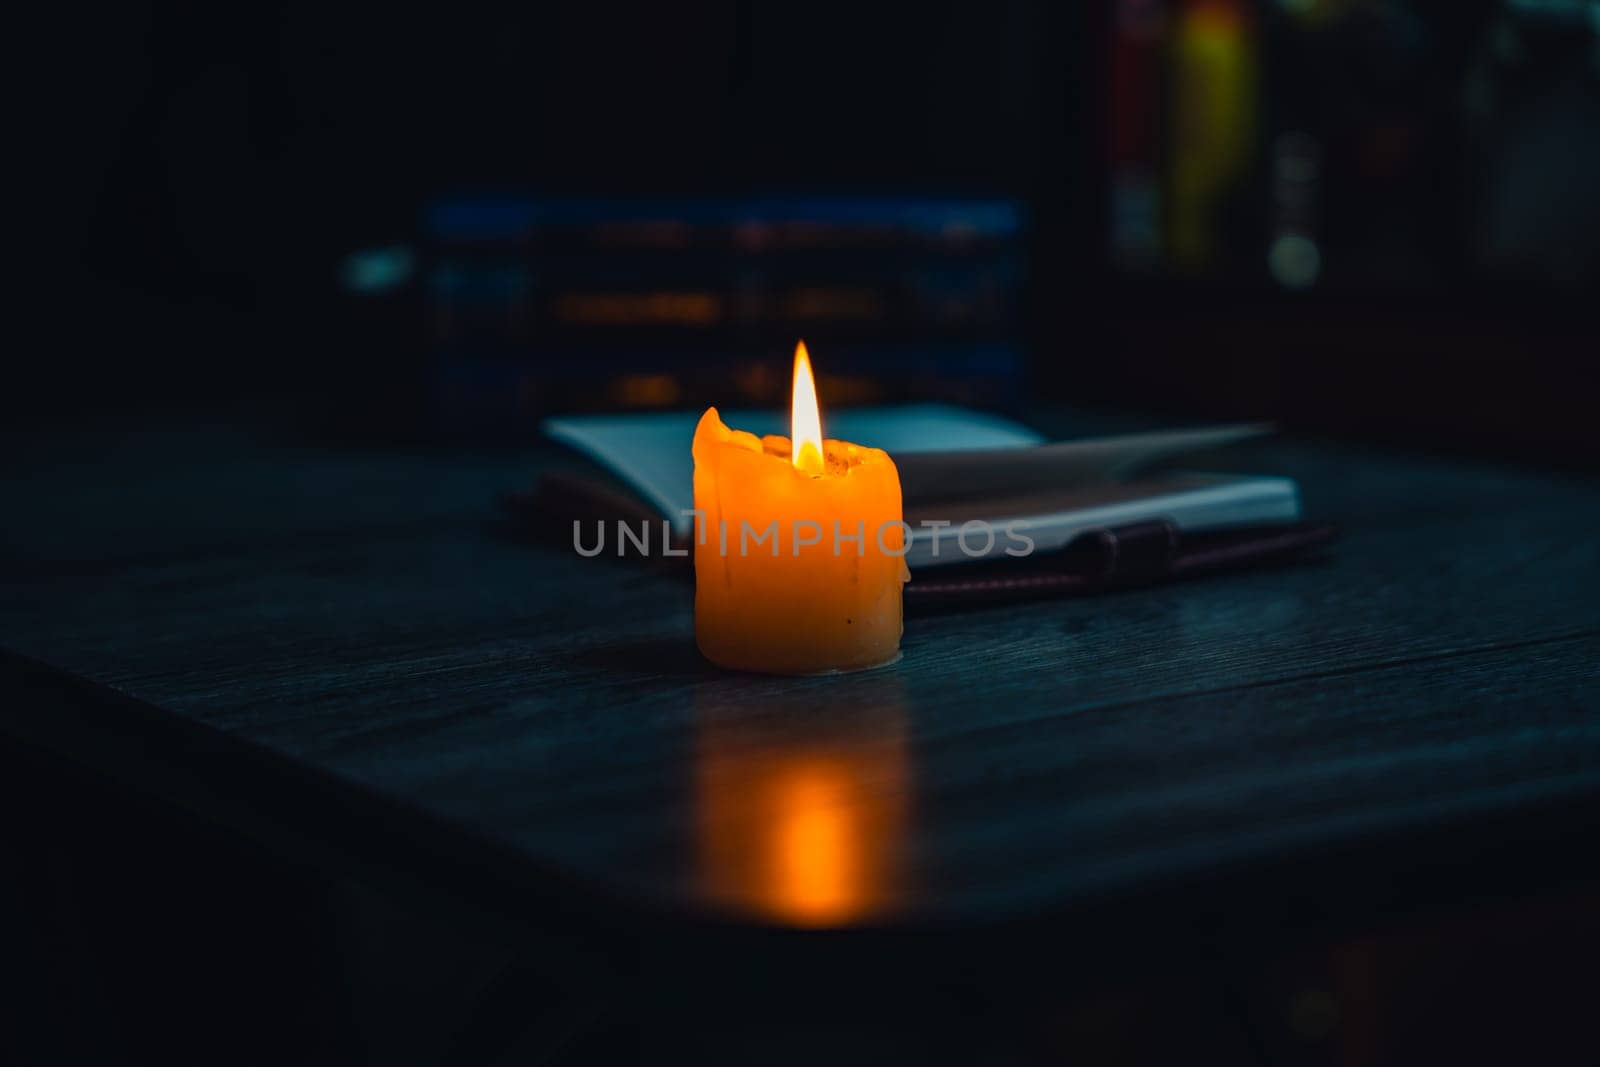 A notebook with a gold pen on the table in the candlelight. High quality photo